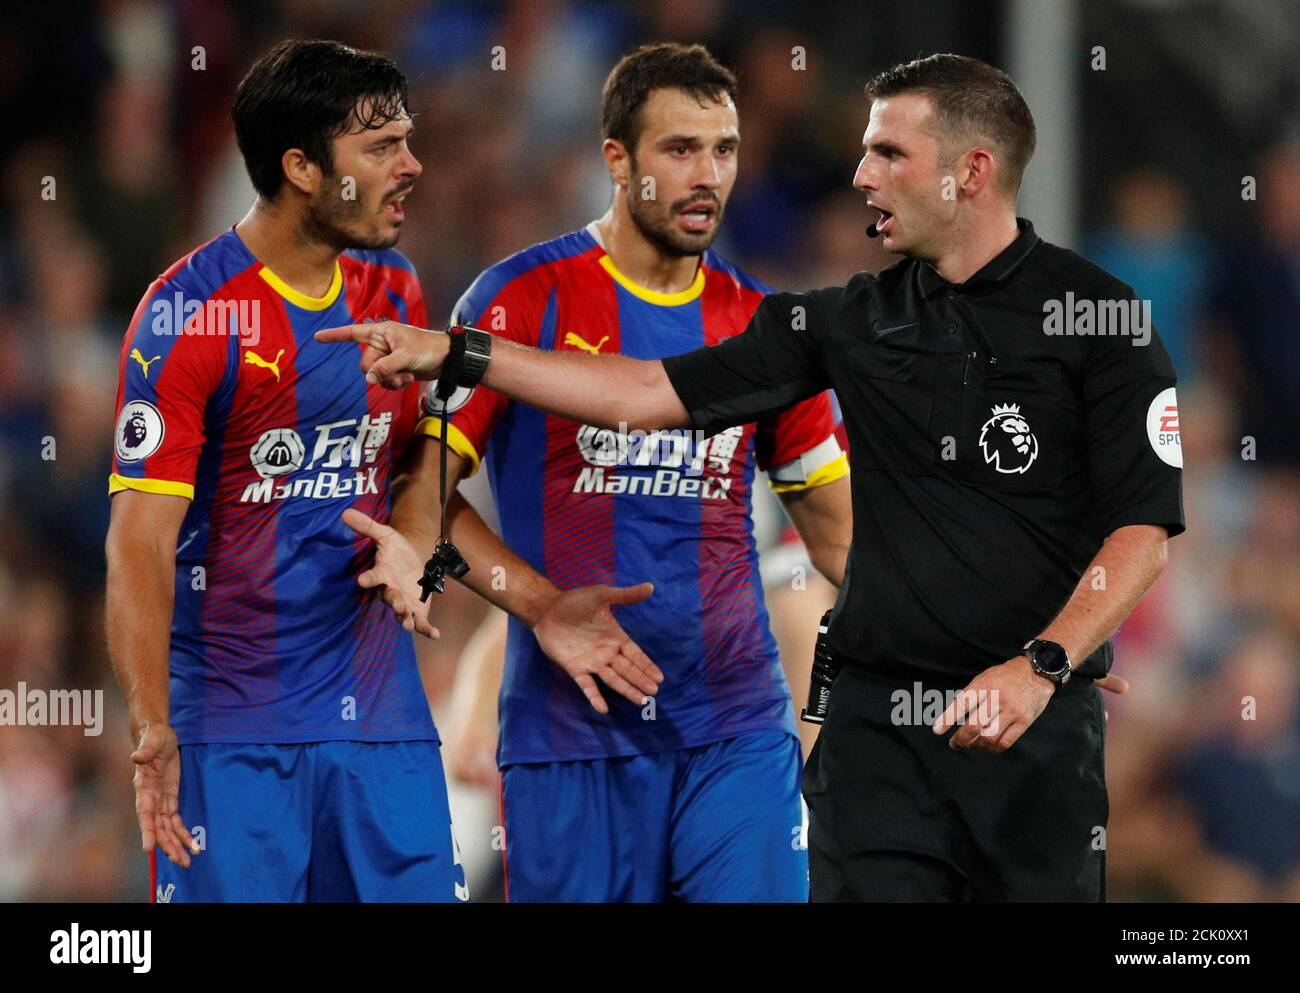 Soccer Football - Premier League - Crystal Palace v Liverpool - Selhurst Park, London, Britain - August 20, 2018  Crystal Palace's James Tomkins and Luka Milivojevic with referee Michael Oliver                    Action Images via Reuters/John Sibley  EDITORIAL USE ONLY. No use with unauthorized audio, video, data, fixture lists, club/league logos or 'live' services. Online in-match use limited to 75 images, no video emulation. No use in betting, games or single club/league/player publications.  Please contact your account representative for further details. Stock Photo